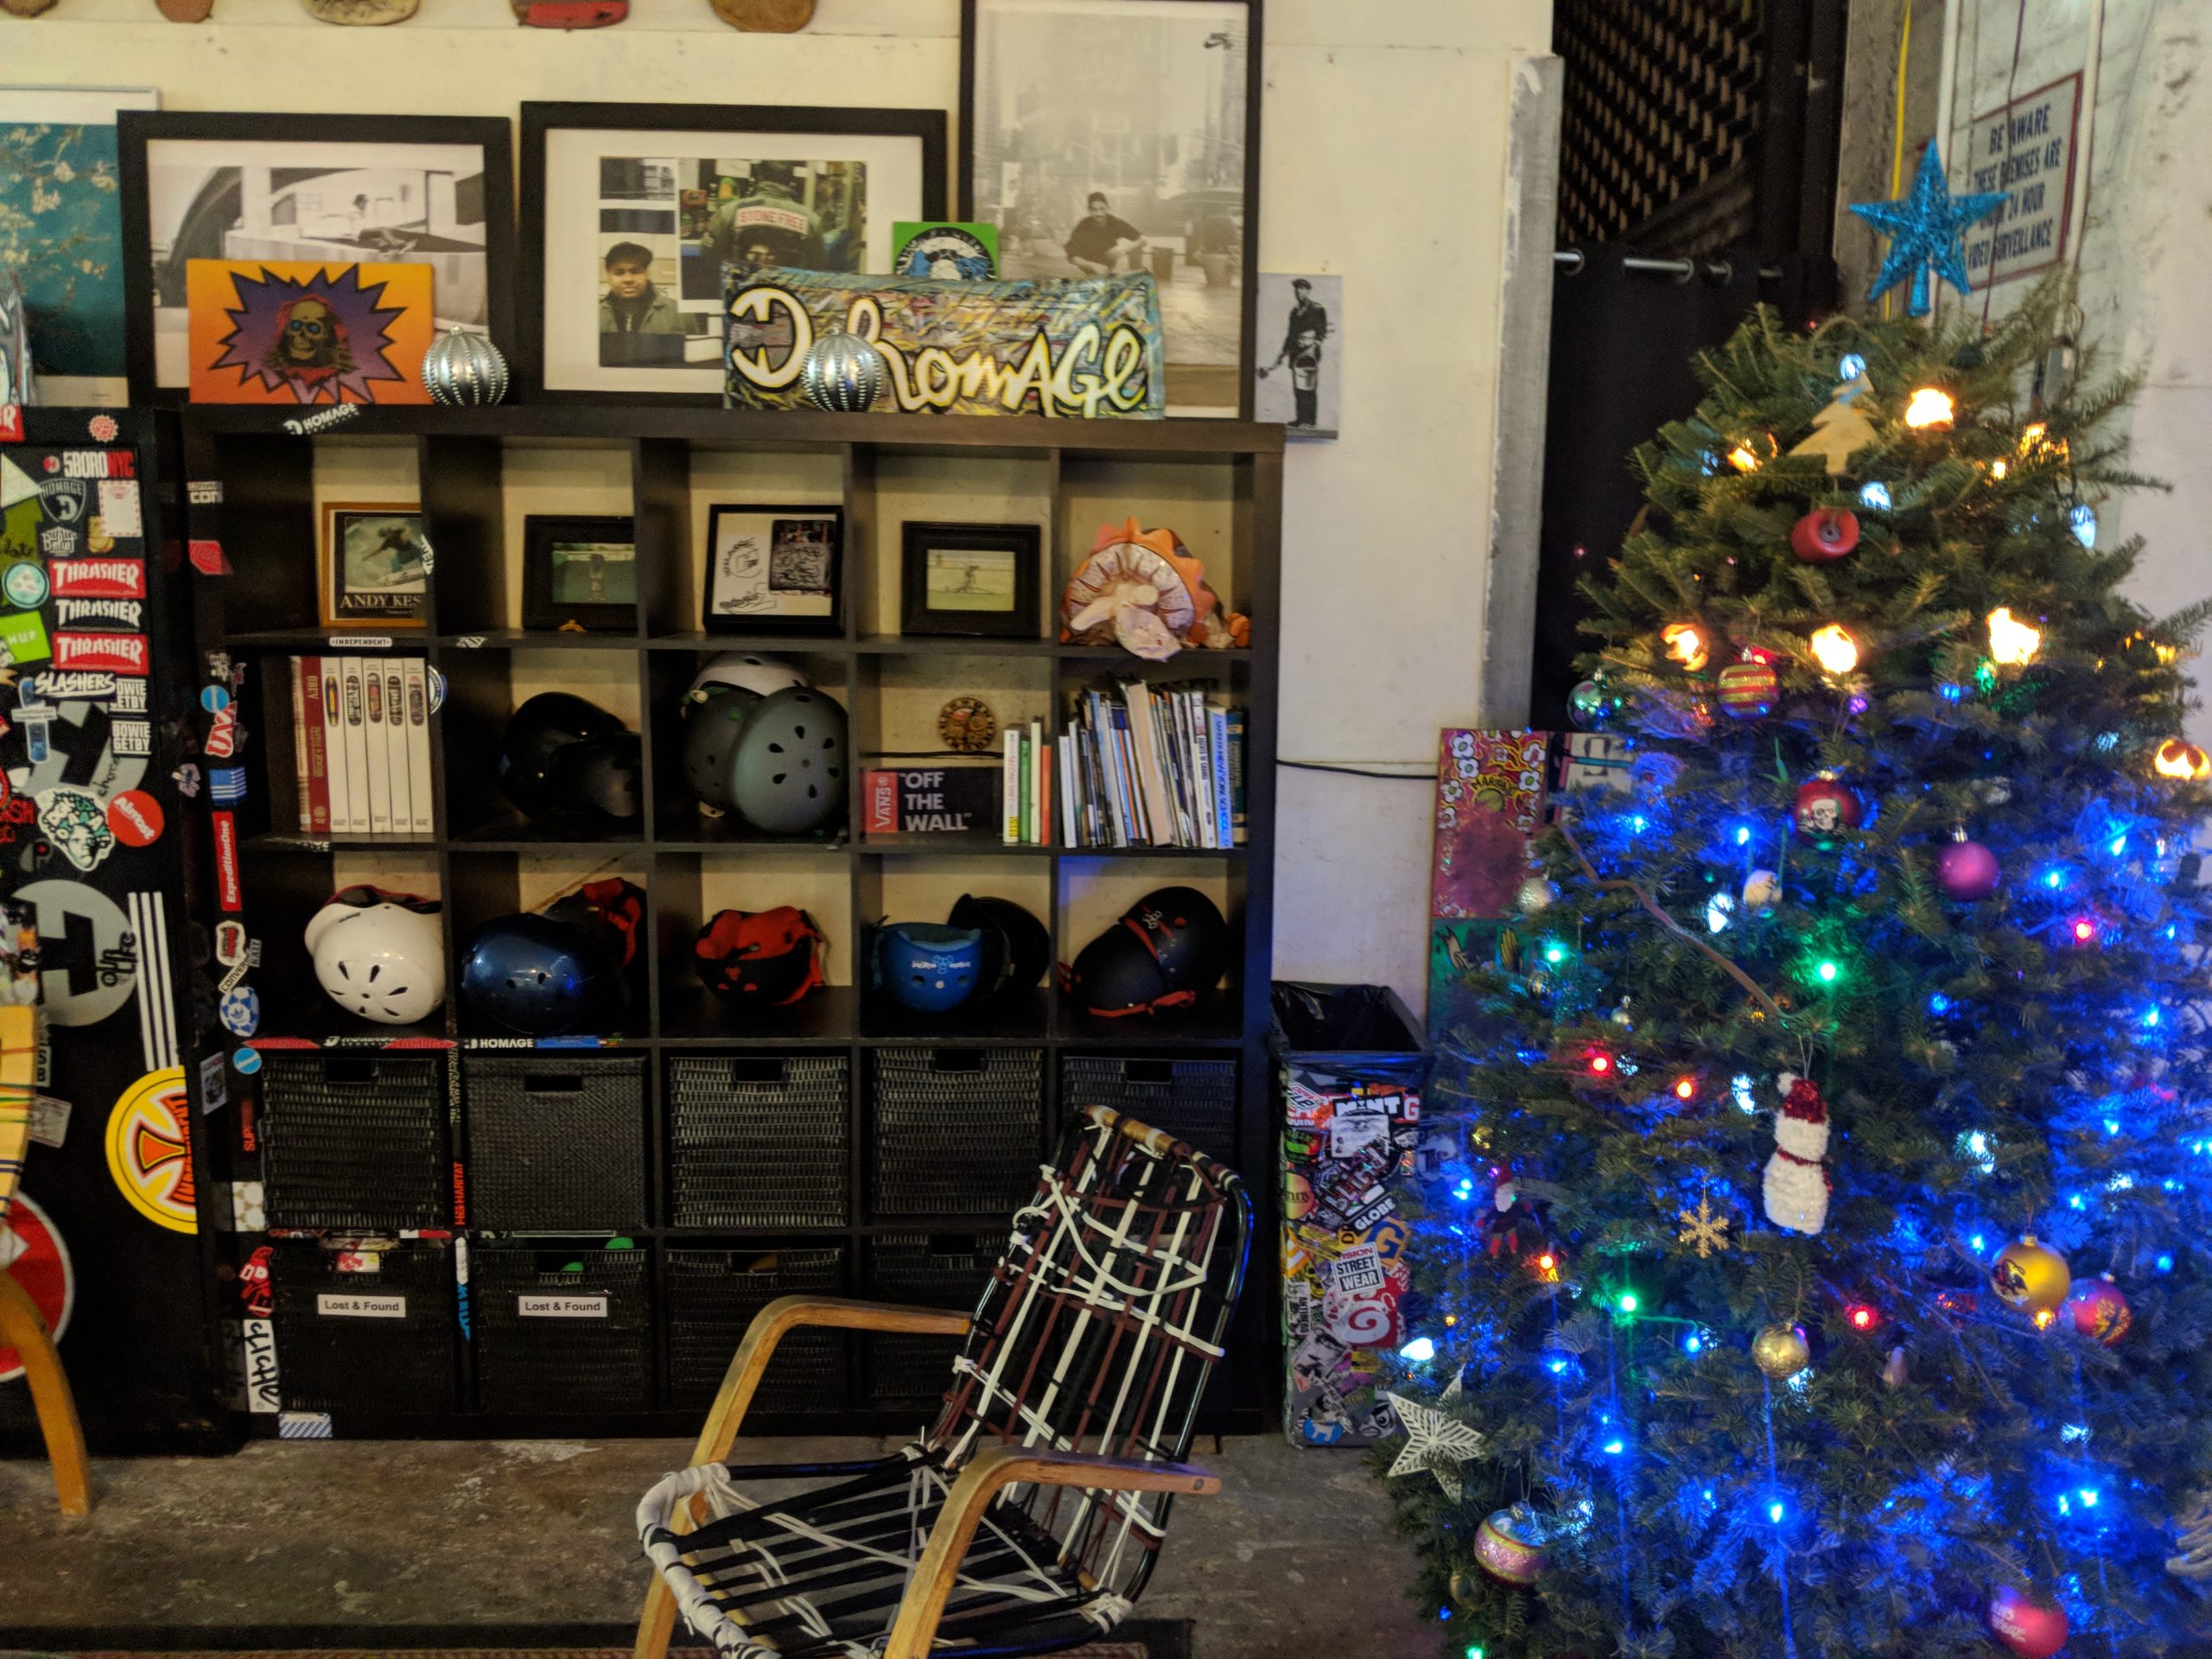 Event Recap: Monday Night Holiday Session @ Homage Brooklyn (2018)